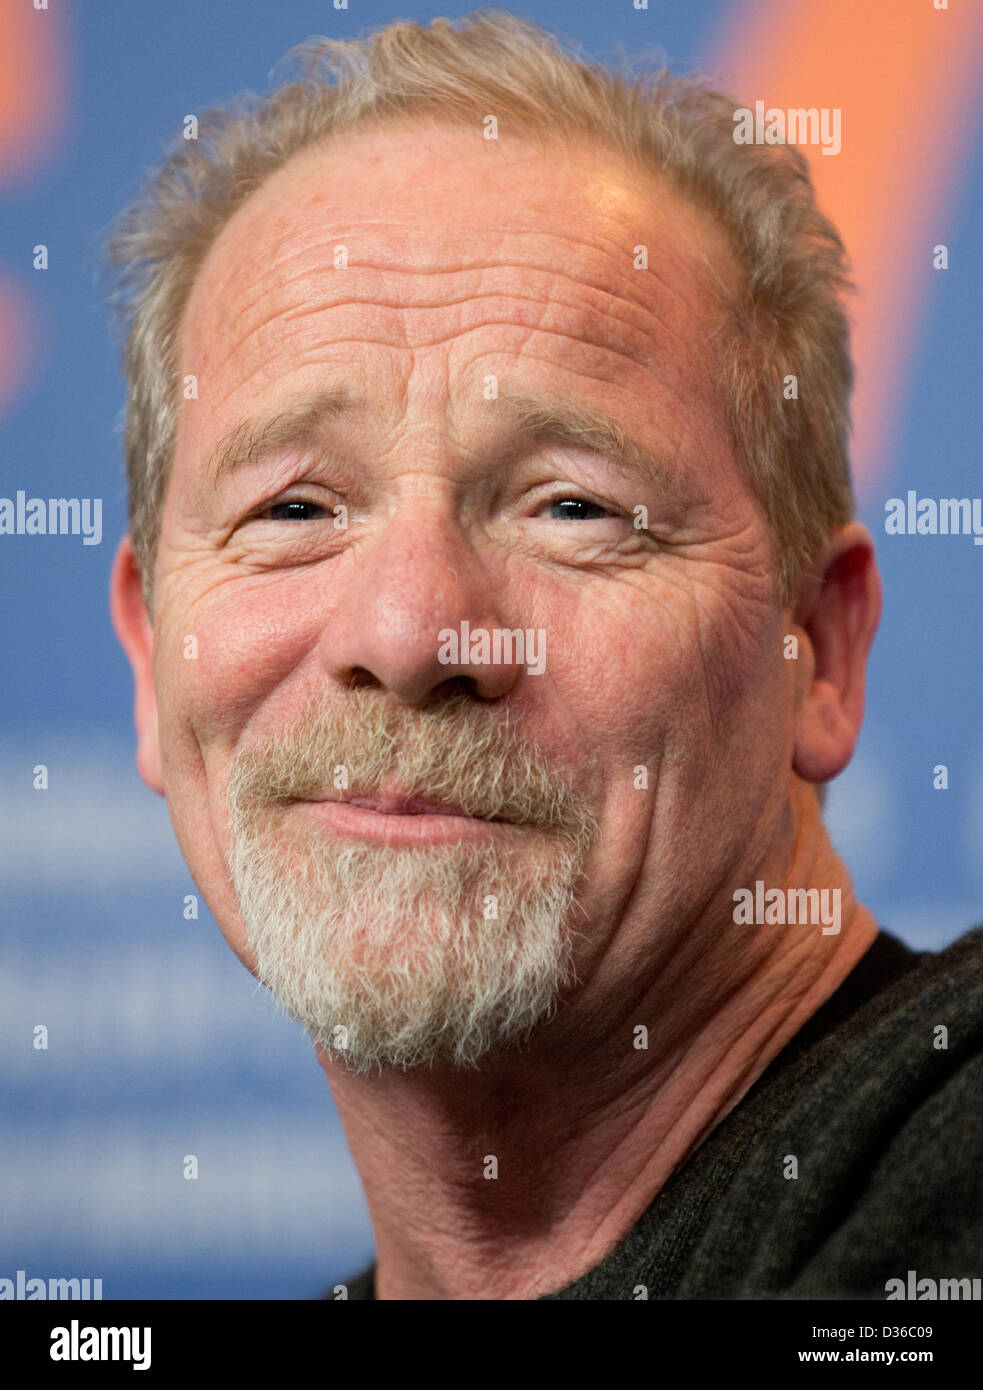 Berlin, Germany. 11th February 2013. Scottish actor Peter Mullan smiles at a press conference for 'Top of the lake' during the 63rd annual Berlin International Film Festival in Berlin, Germany, 11 February 2013. The movie is presented in section Berlinale Special at the Berlinale running from 07 to 17 February. Photo: Kay Nietfeld/dpa/Alamy Live News Stock Photo